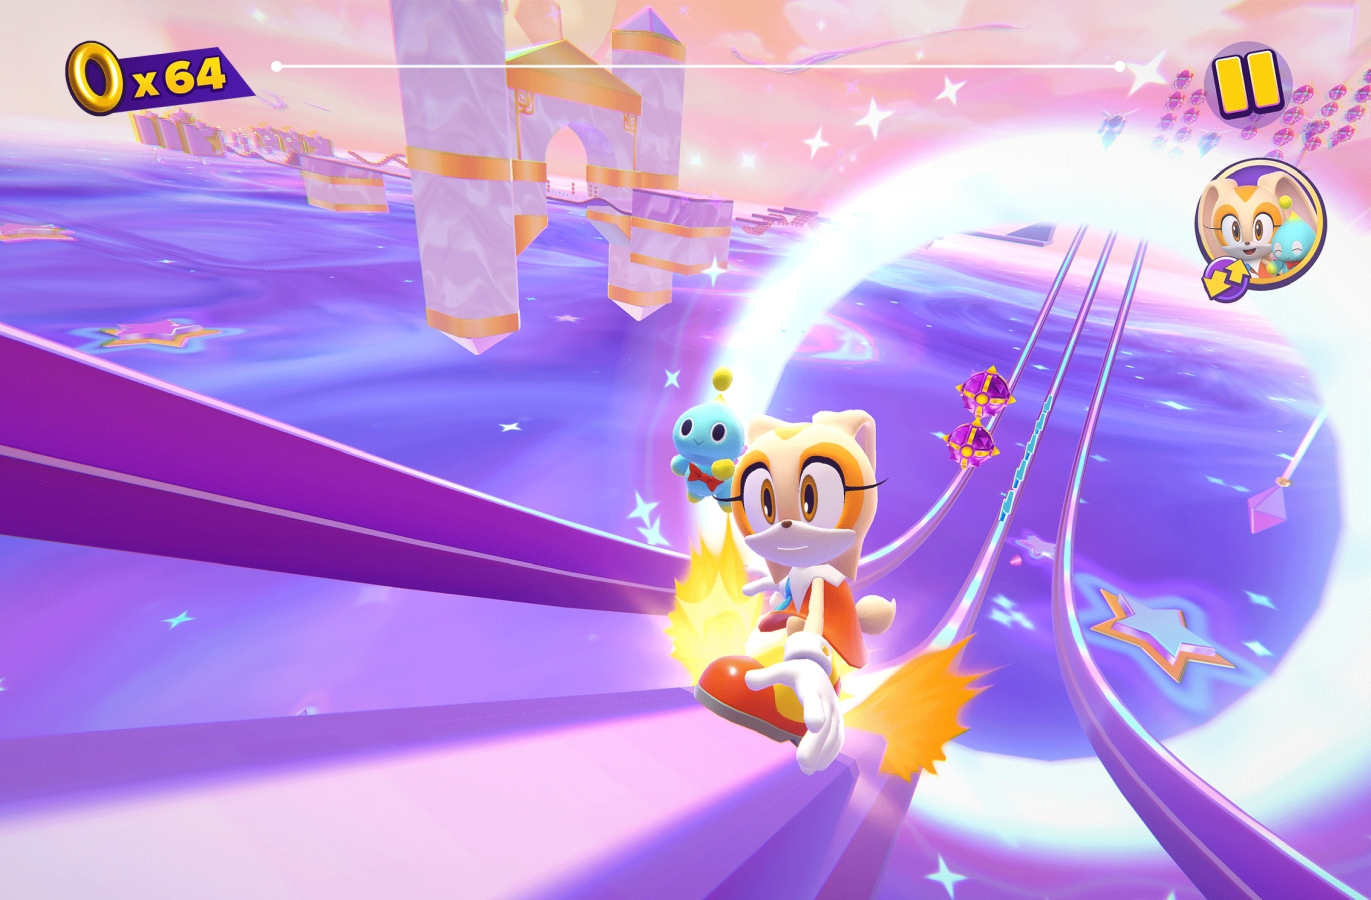 Dream another dream in Sonic Dream Team's second content update